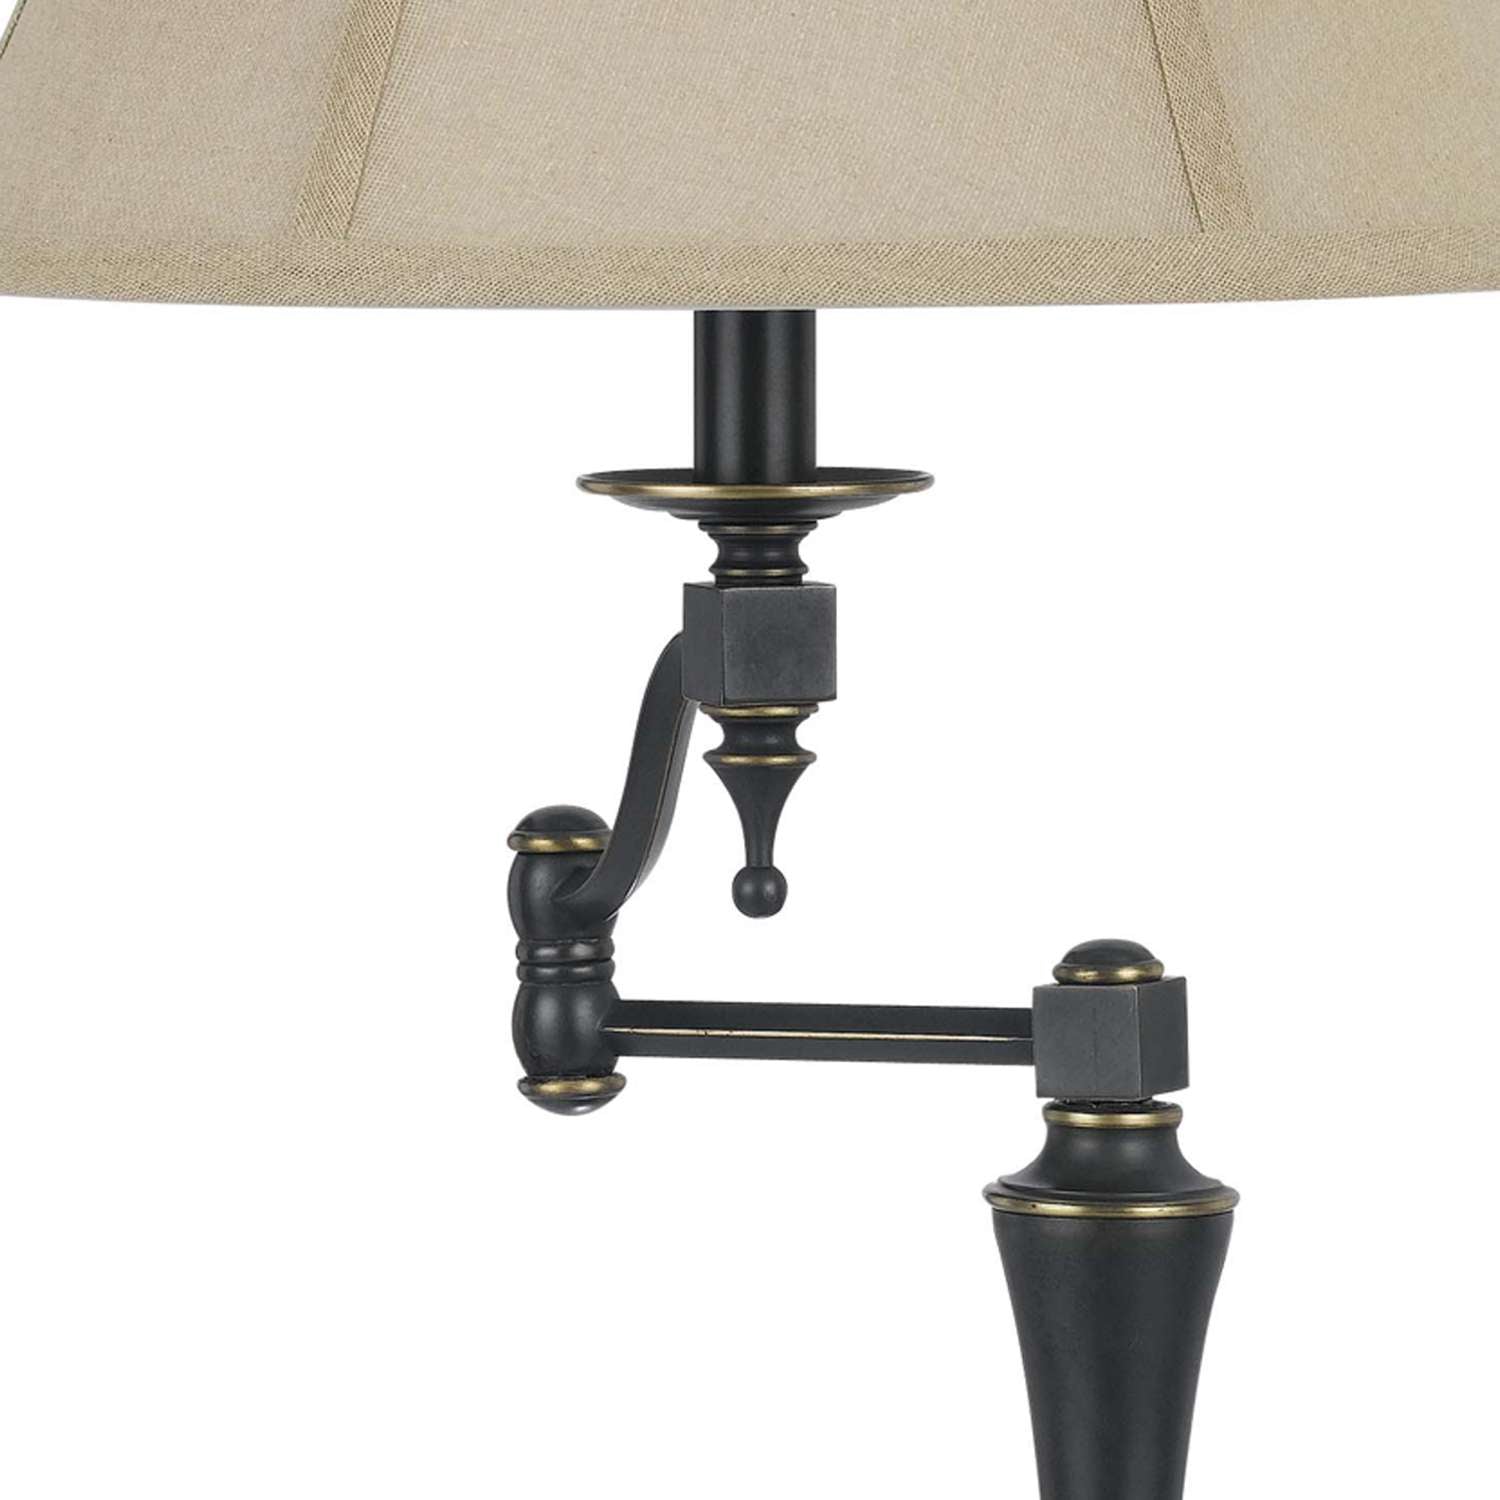 Metal Body Table Lamp With Fabric Tapered Bell Shade, Black And Beige By Benzara